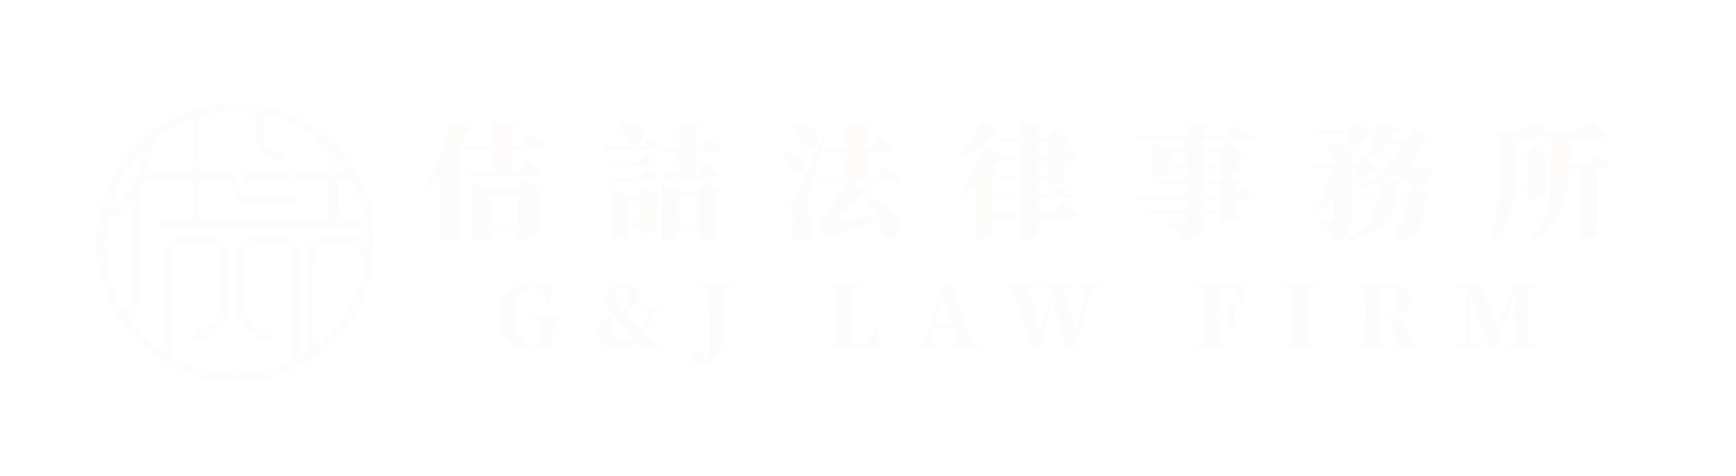 G&J Law Firm